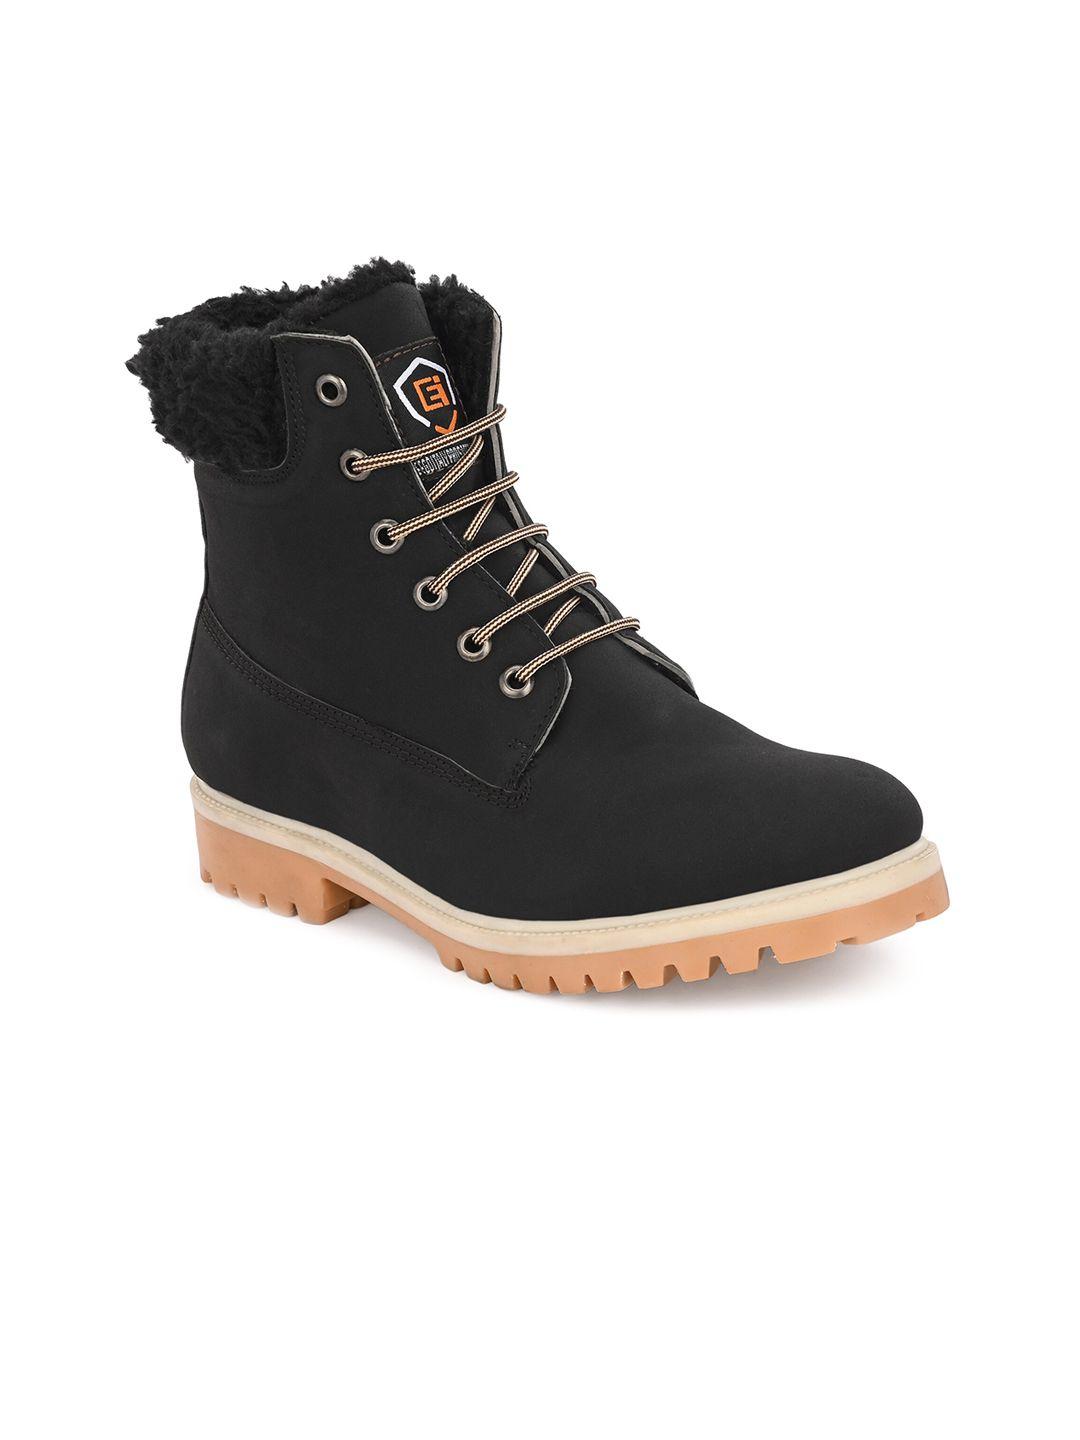 eego italy men snow boot with furl